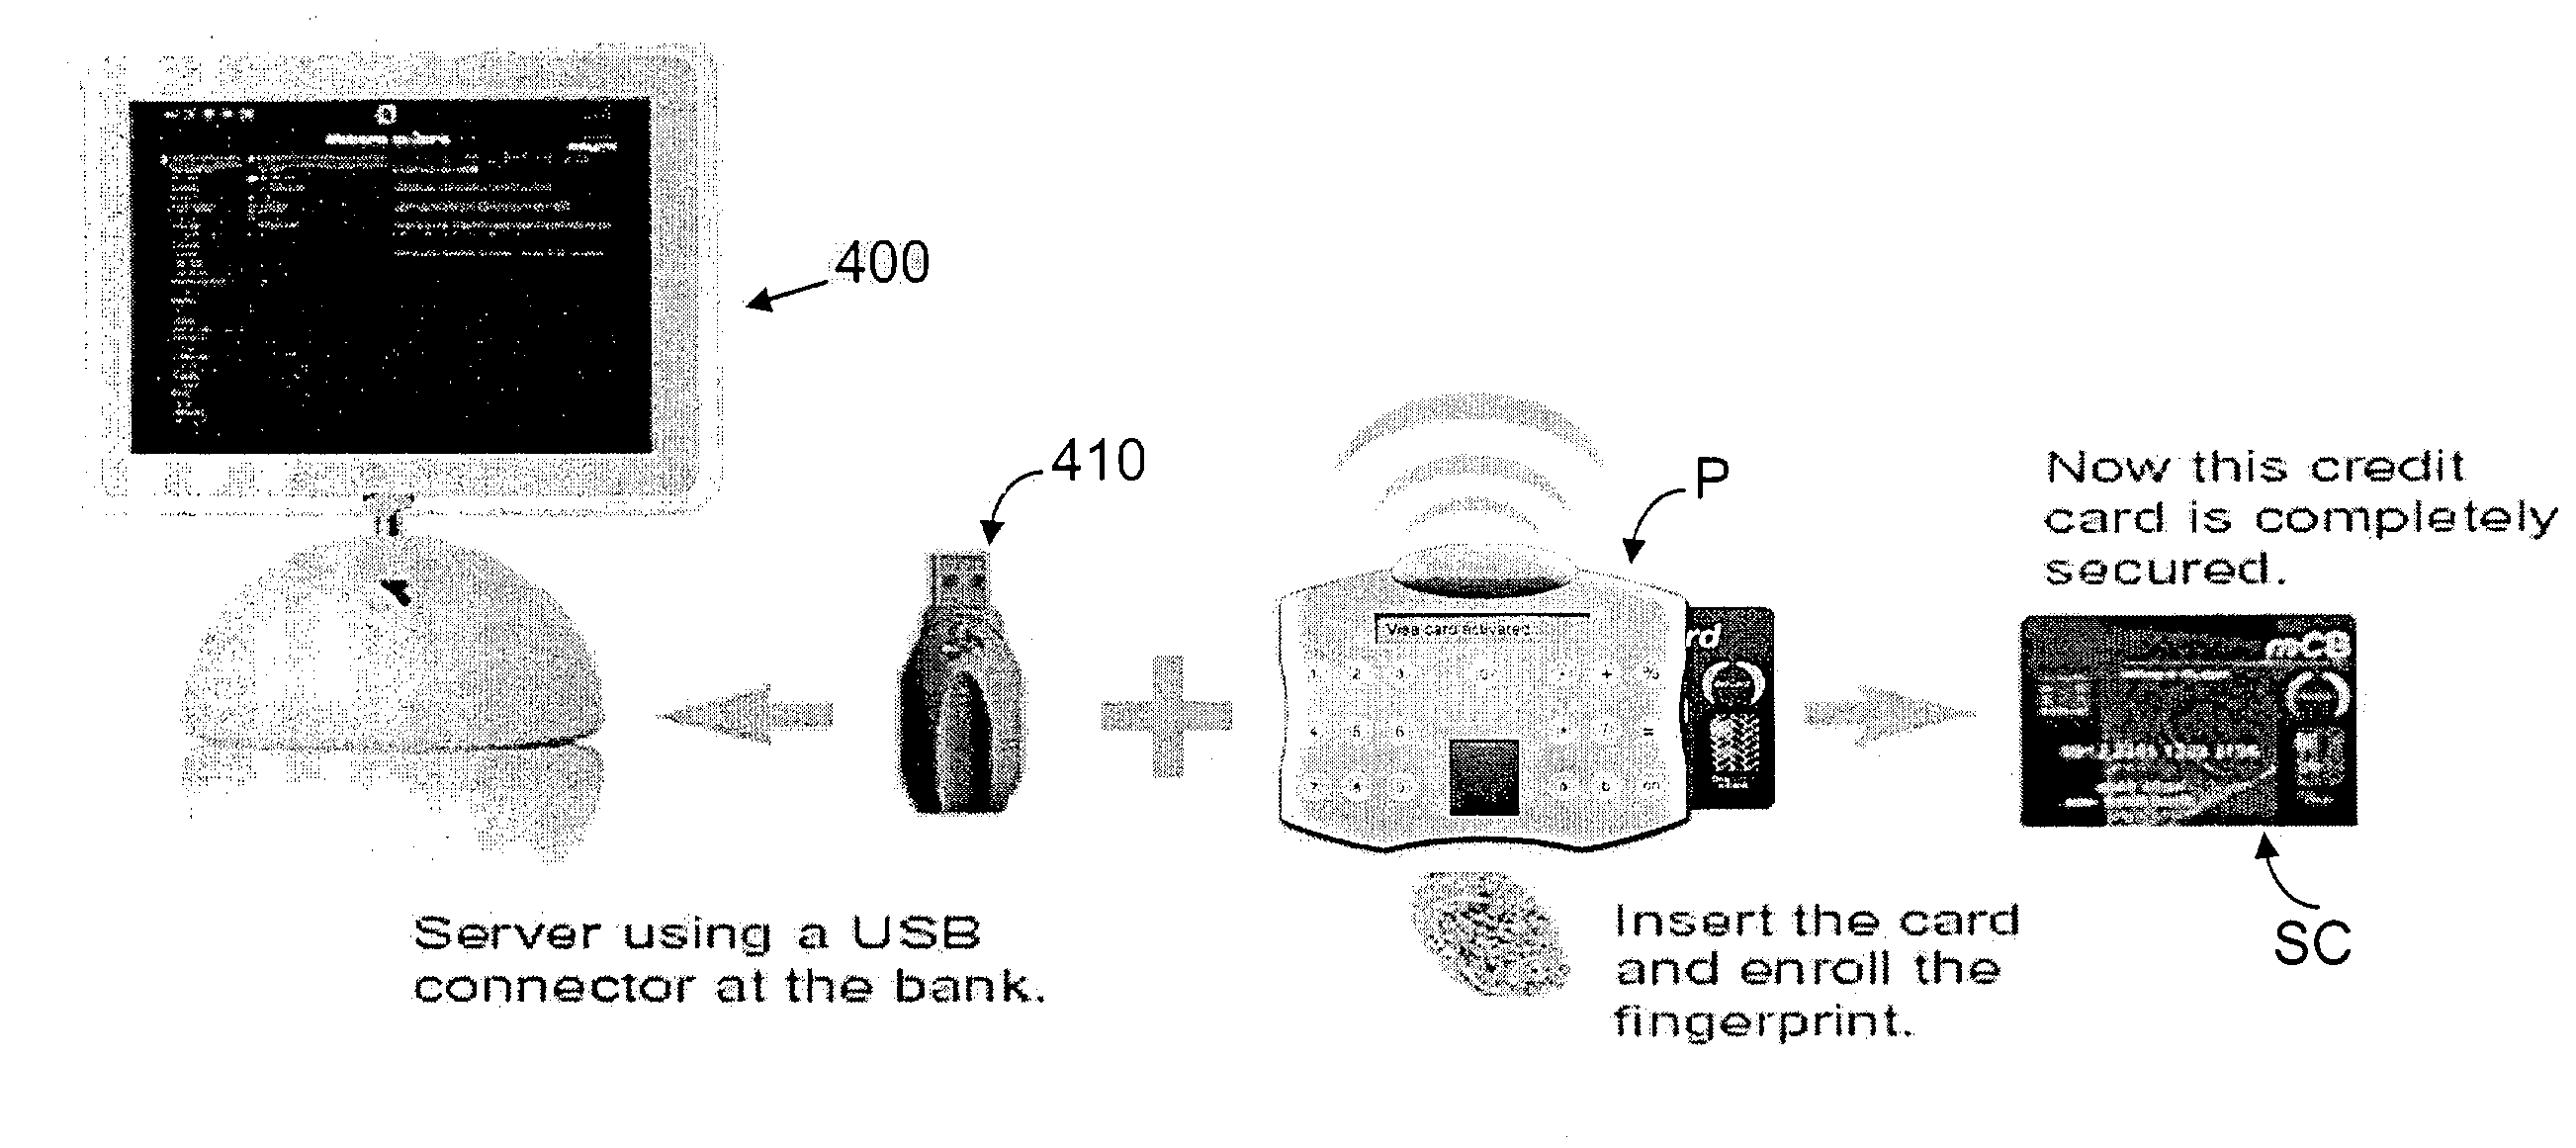 Personal biometric authentication and authorization device